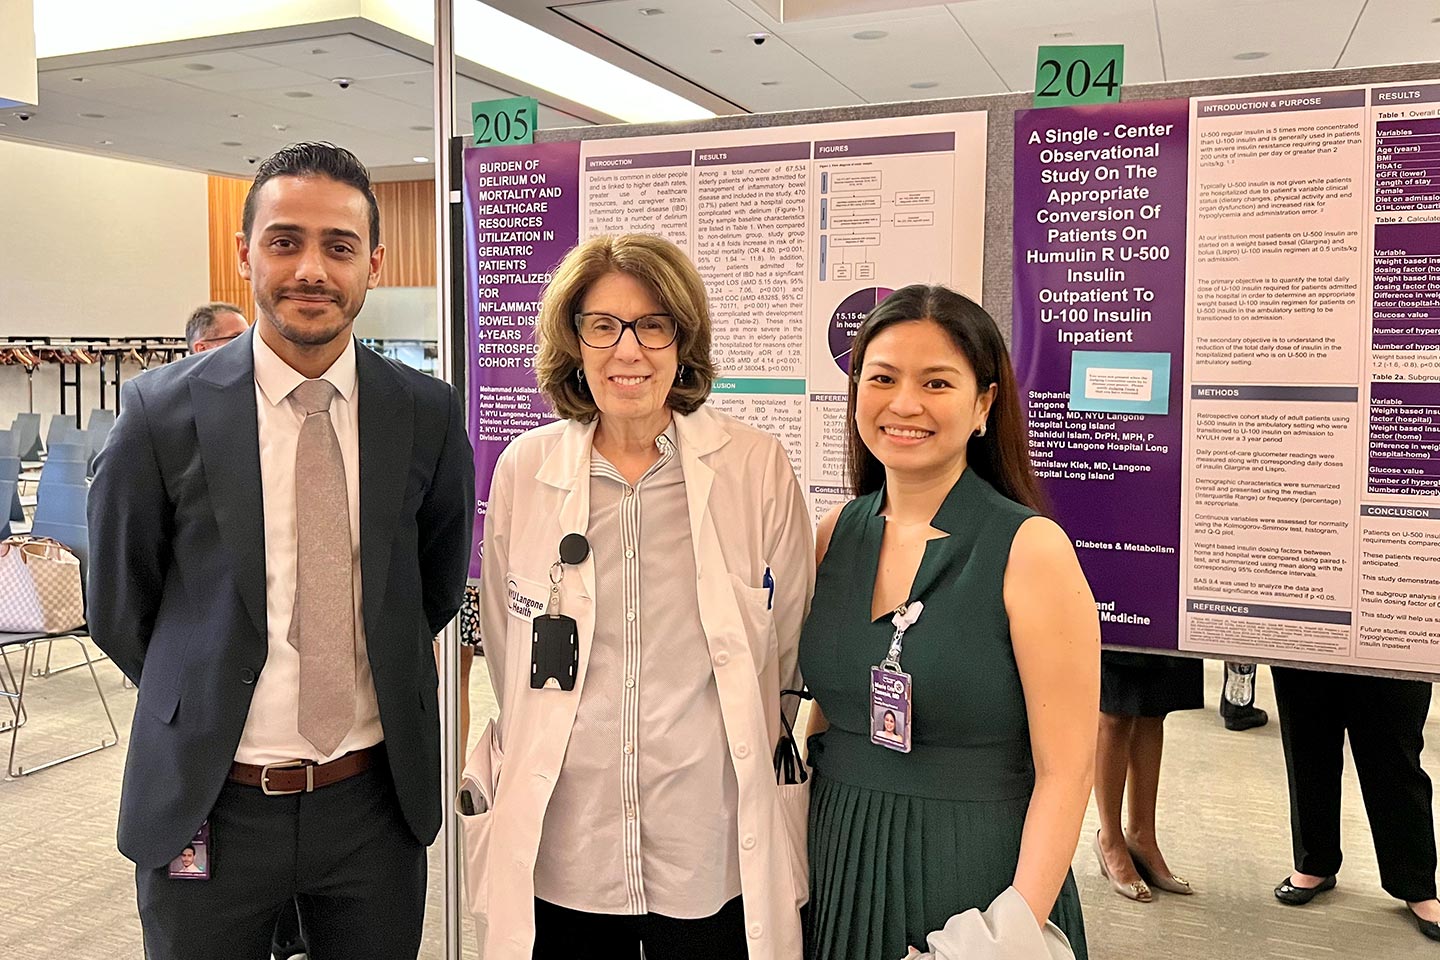 A recent fellow posing with Dr. Lucy O. Macina and Dr. Marie Cris B. Tamesis in front of posters displaying their work